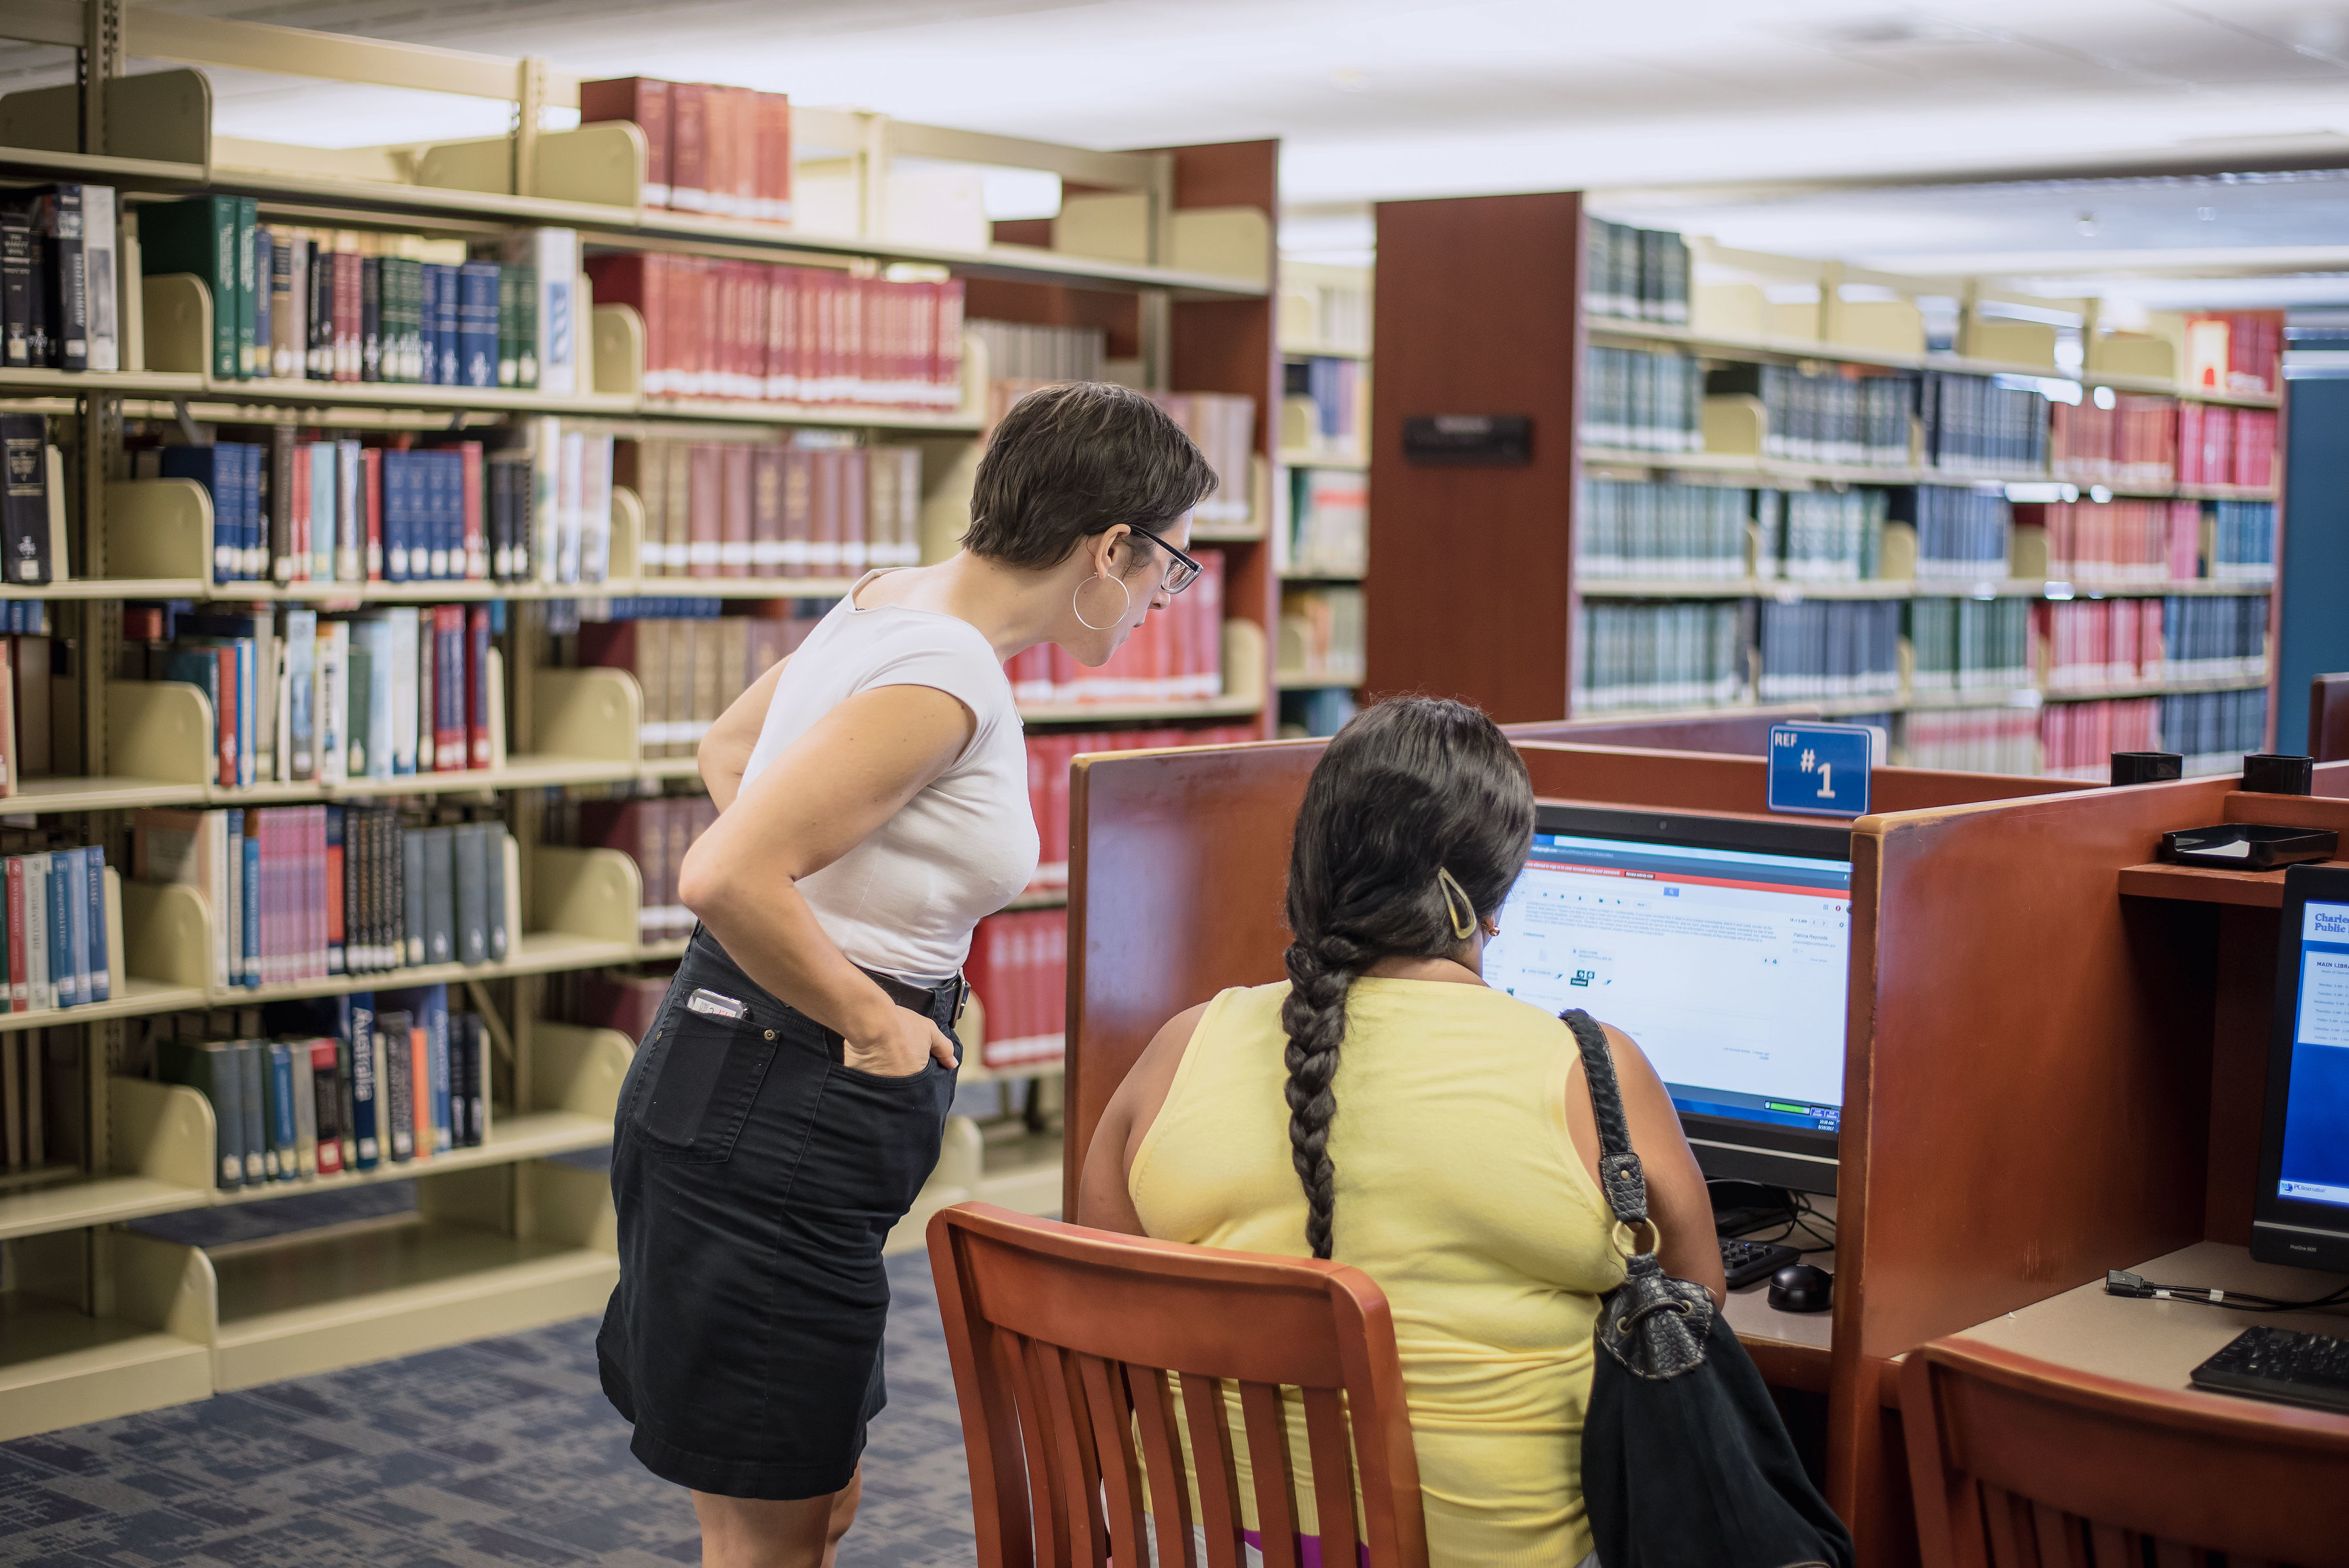  How jobseekers can make the most of in-person visits to the library